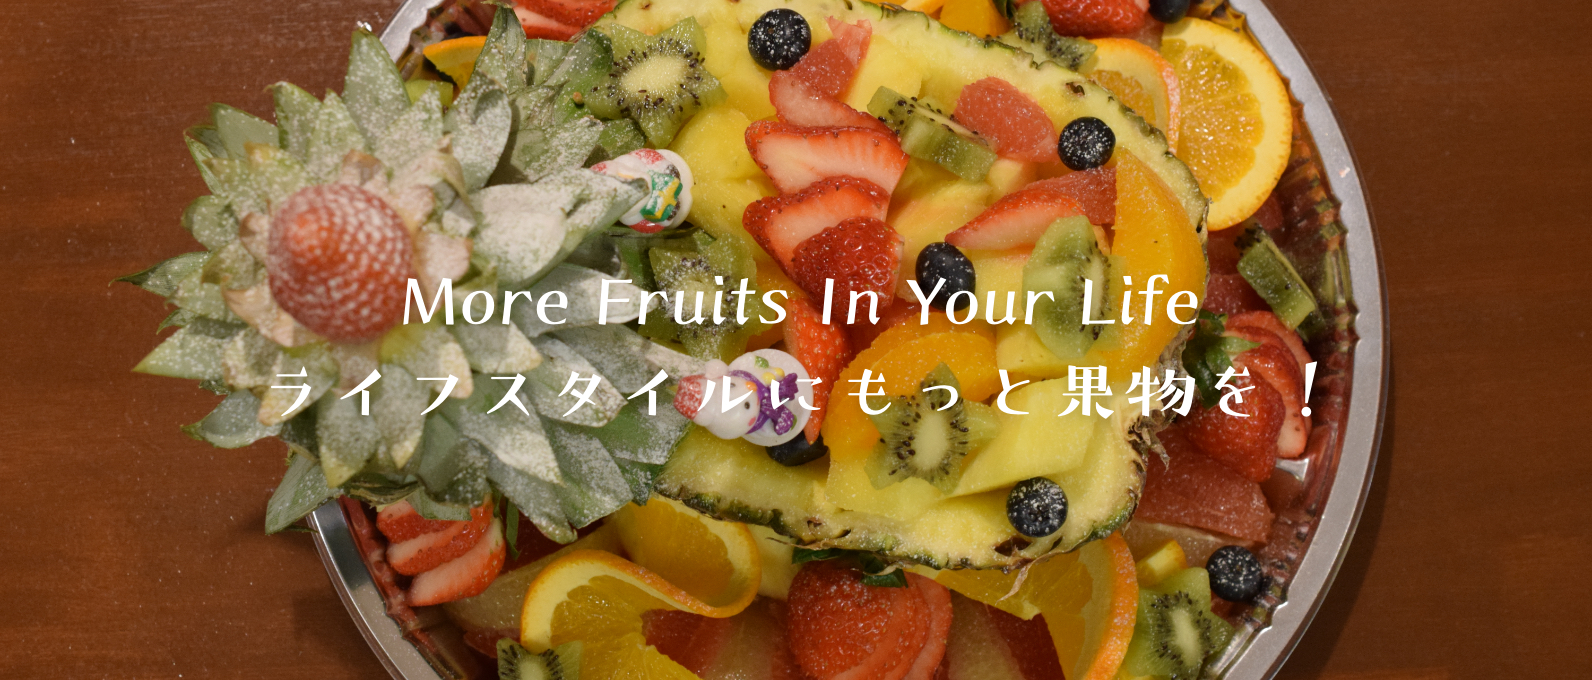 More Fruits In Your Life ライフスタイルにもっと果物を！